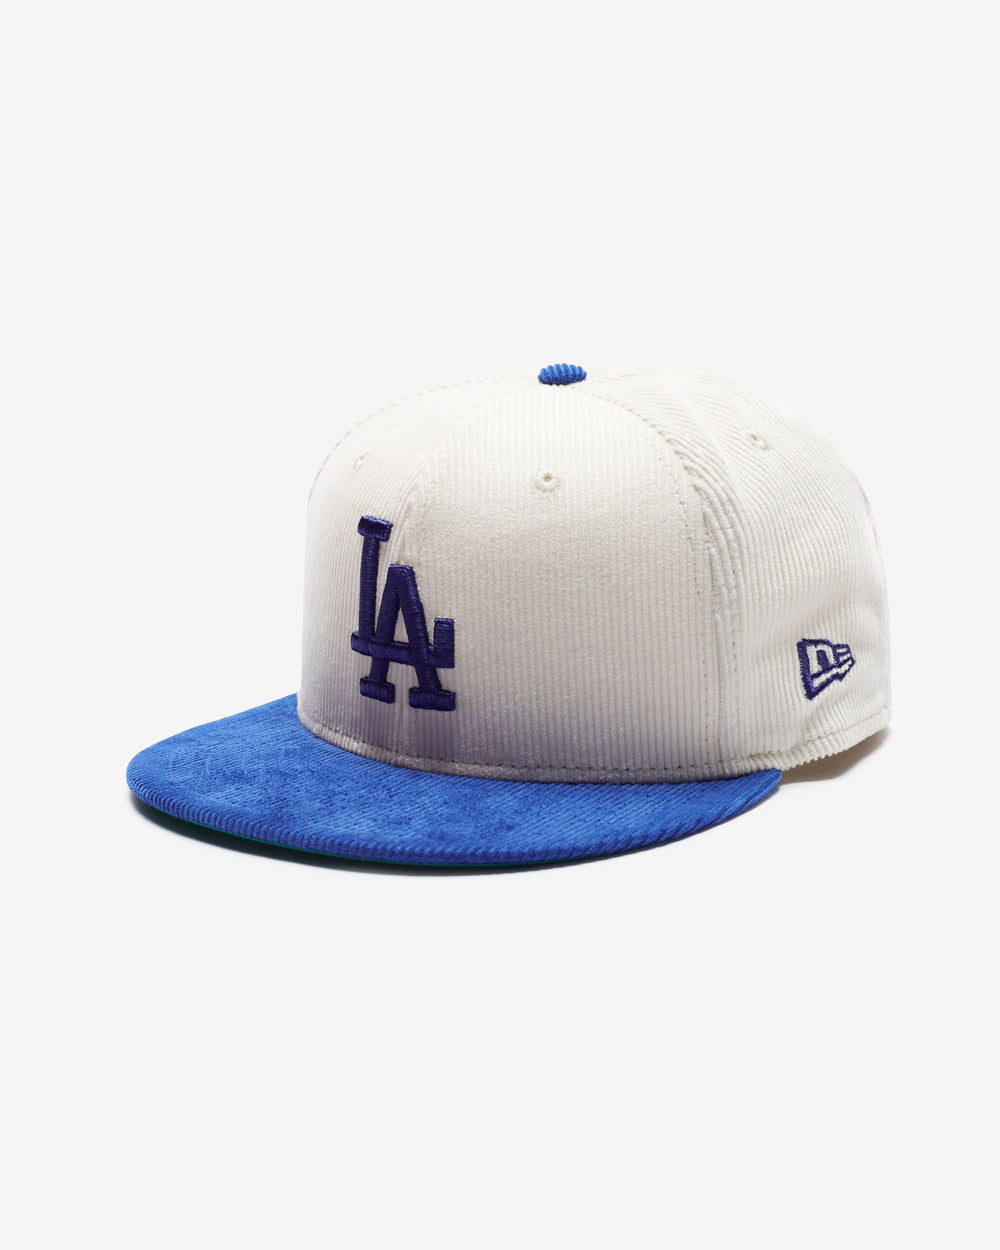 UNDEFEATED X NEW ERA DODGERS FITTED - CHROME WHITE / 6 7/8